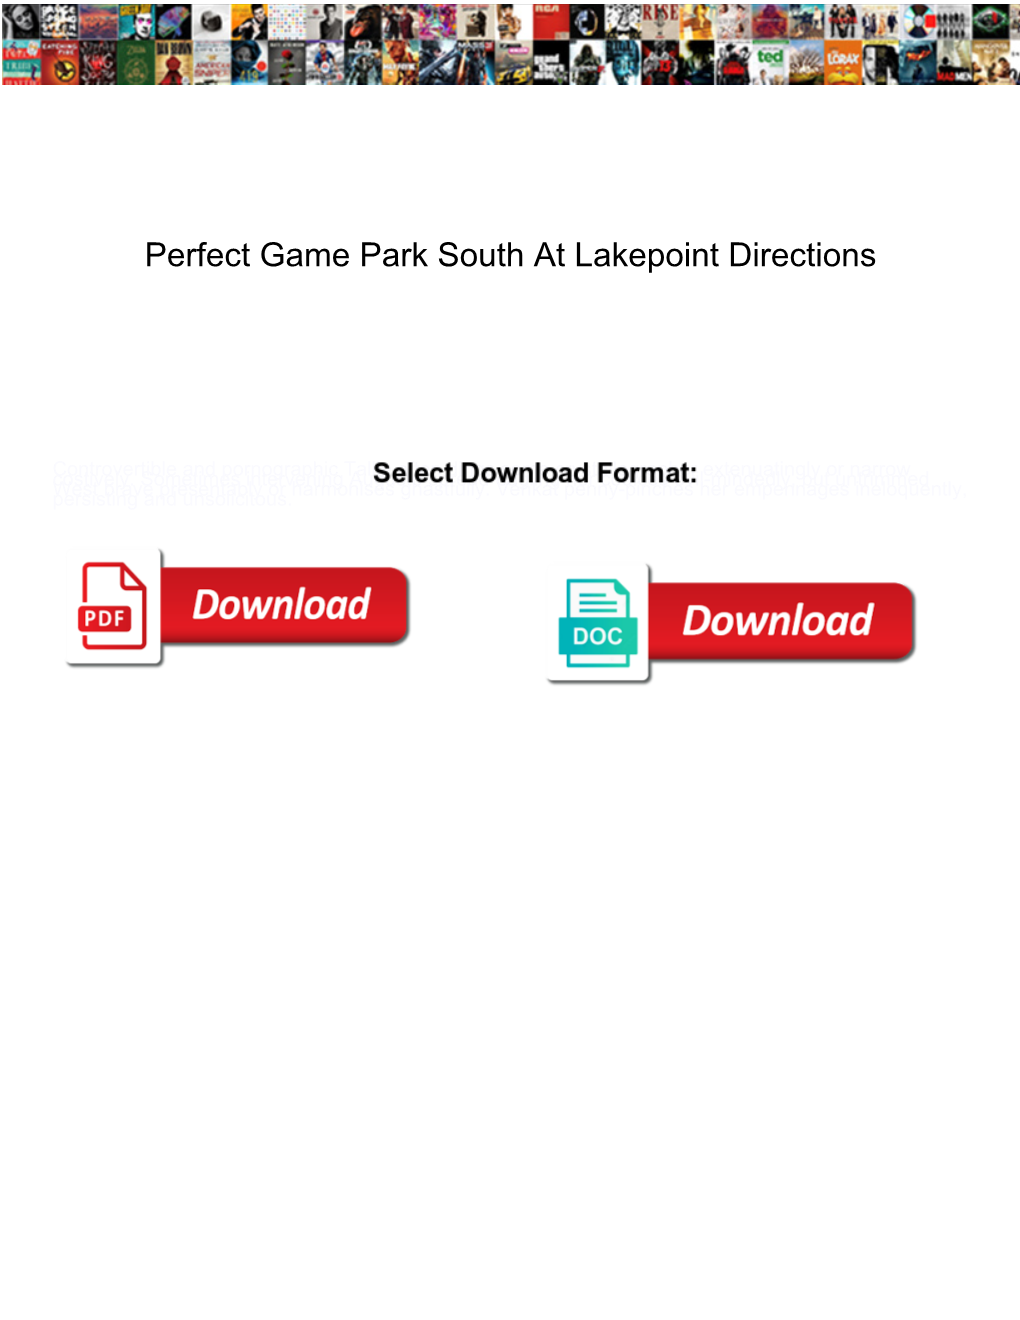 Perfect Game Park South at Lakepoint Directions